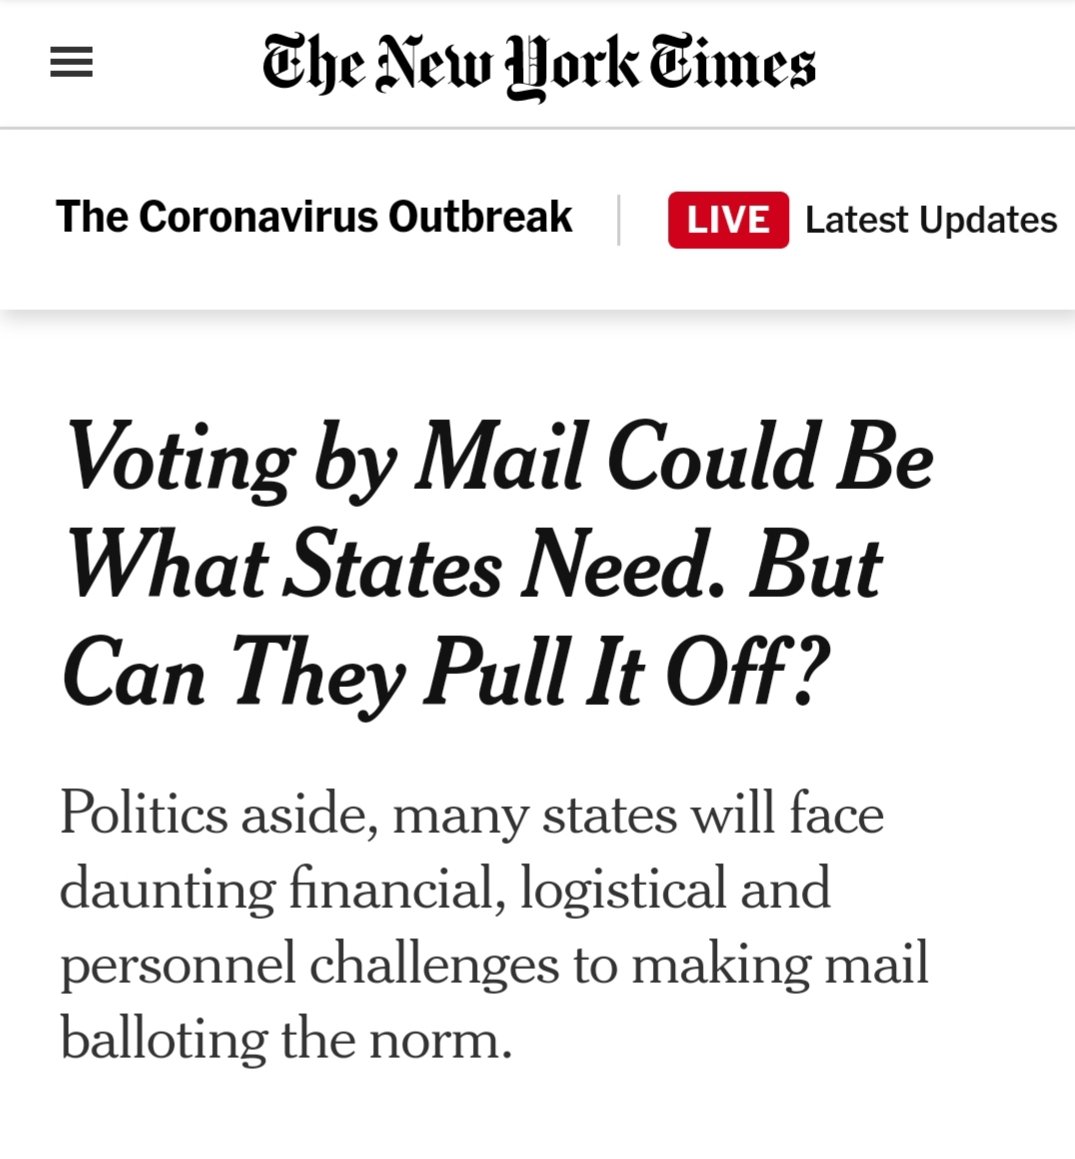 CORRUPT & BROKEN1) This talk of the Democratic Party pushing the idea of mail-in ballots in the coming 2020 US election due to the Covid-19 pandemic is fairly concerning.